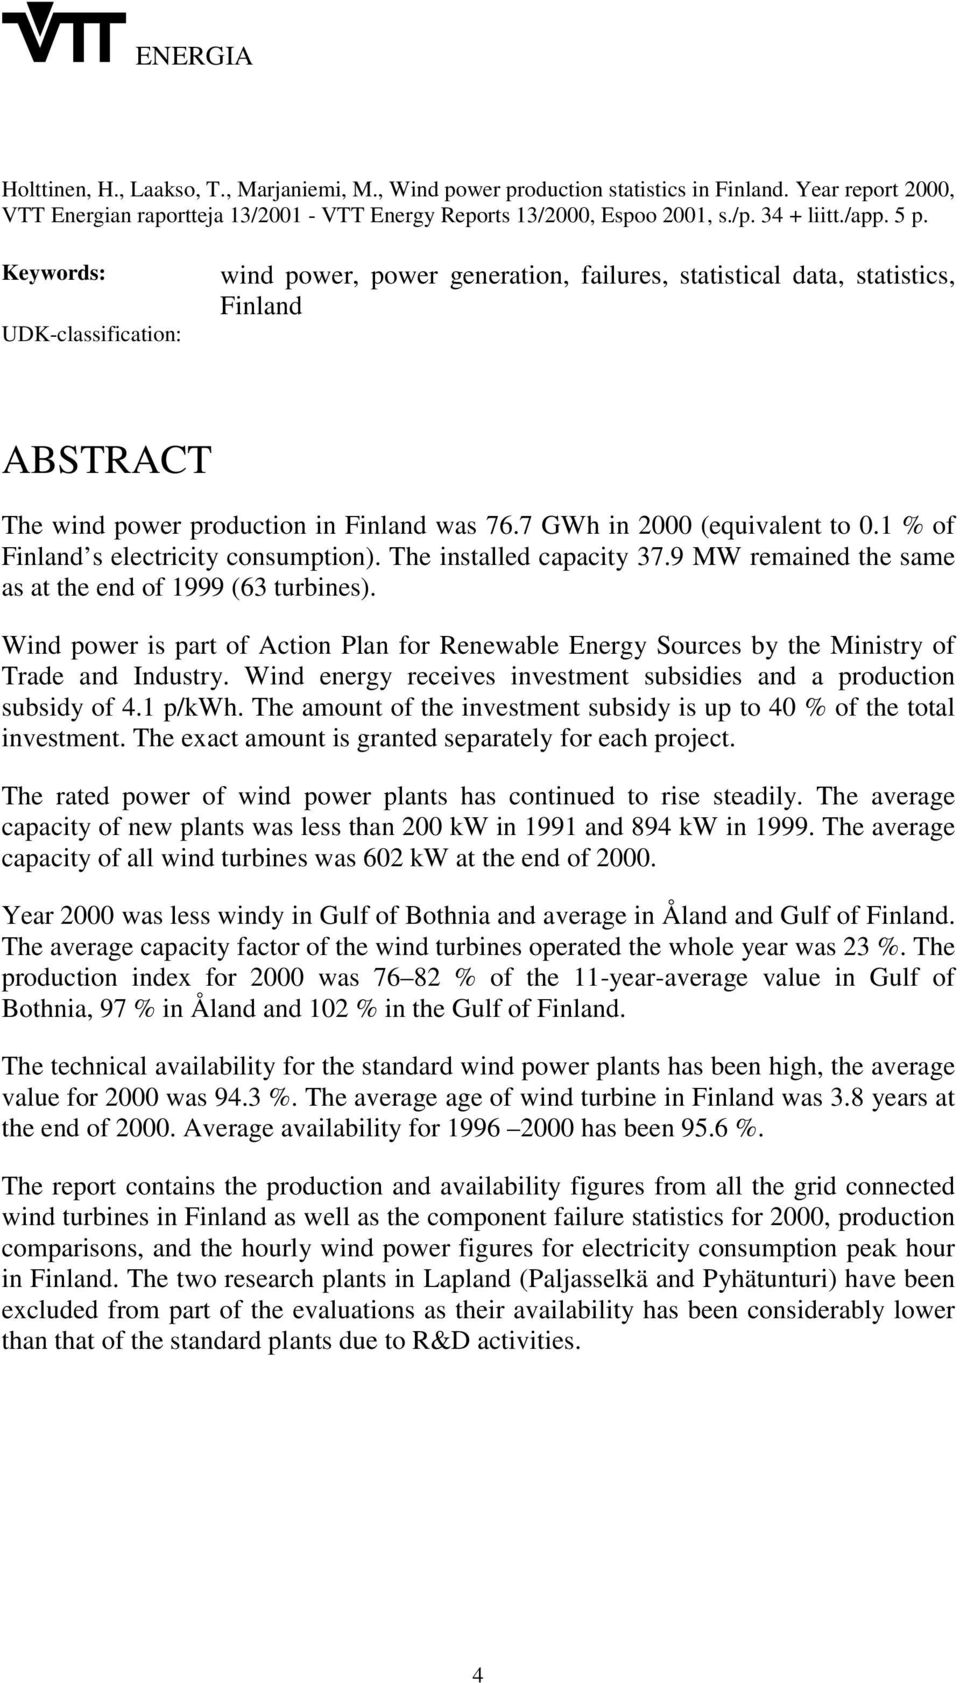 7 GWh in 2000 (equivalent to 0.1 % of Finland s electricity consumption). The installed capacity 37.9 MW remained the same as at the end of 1999 (63 turbines).